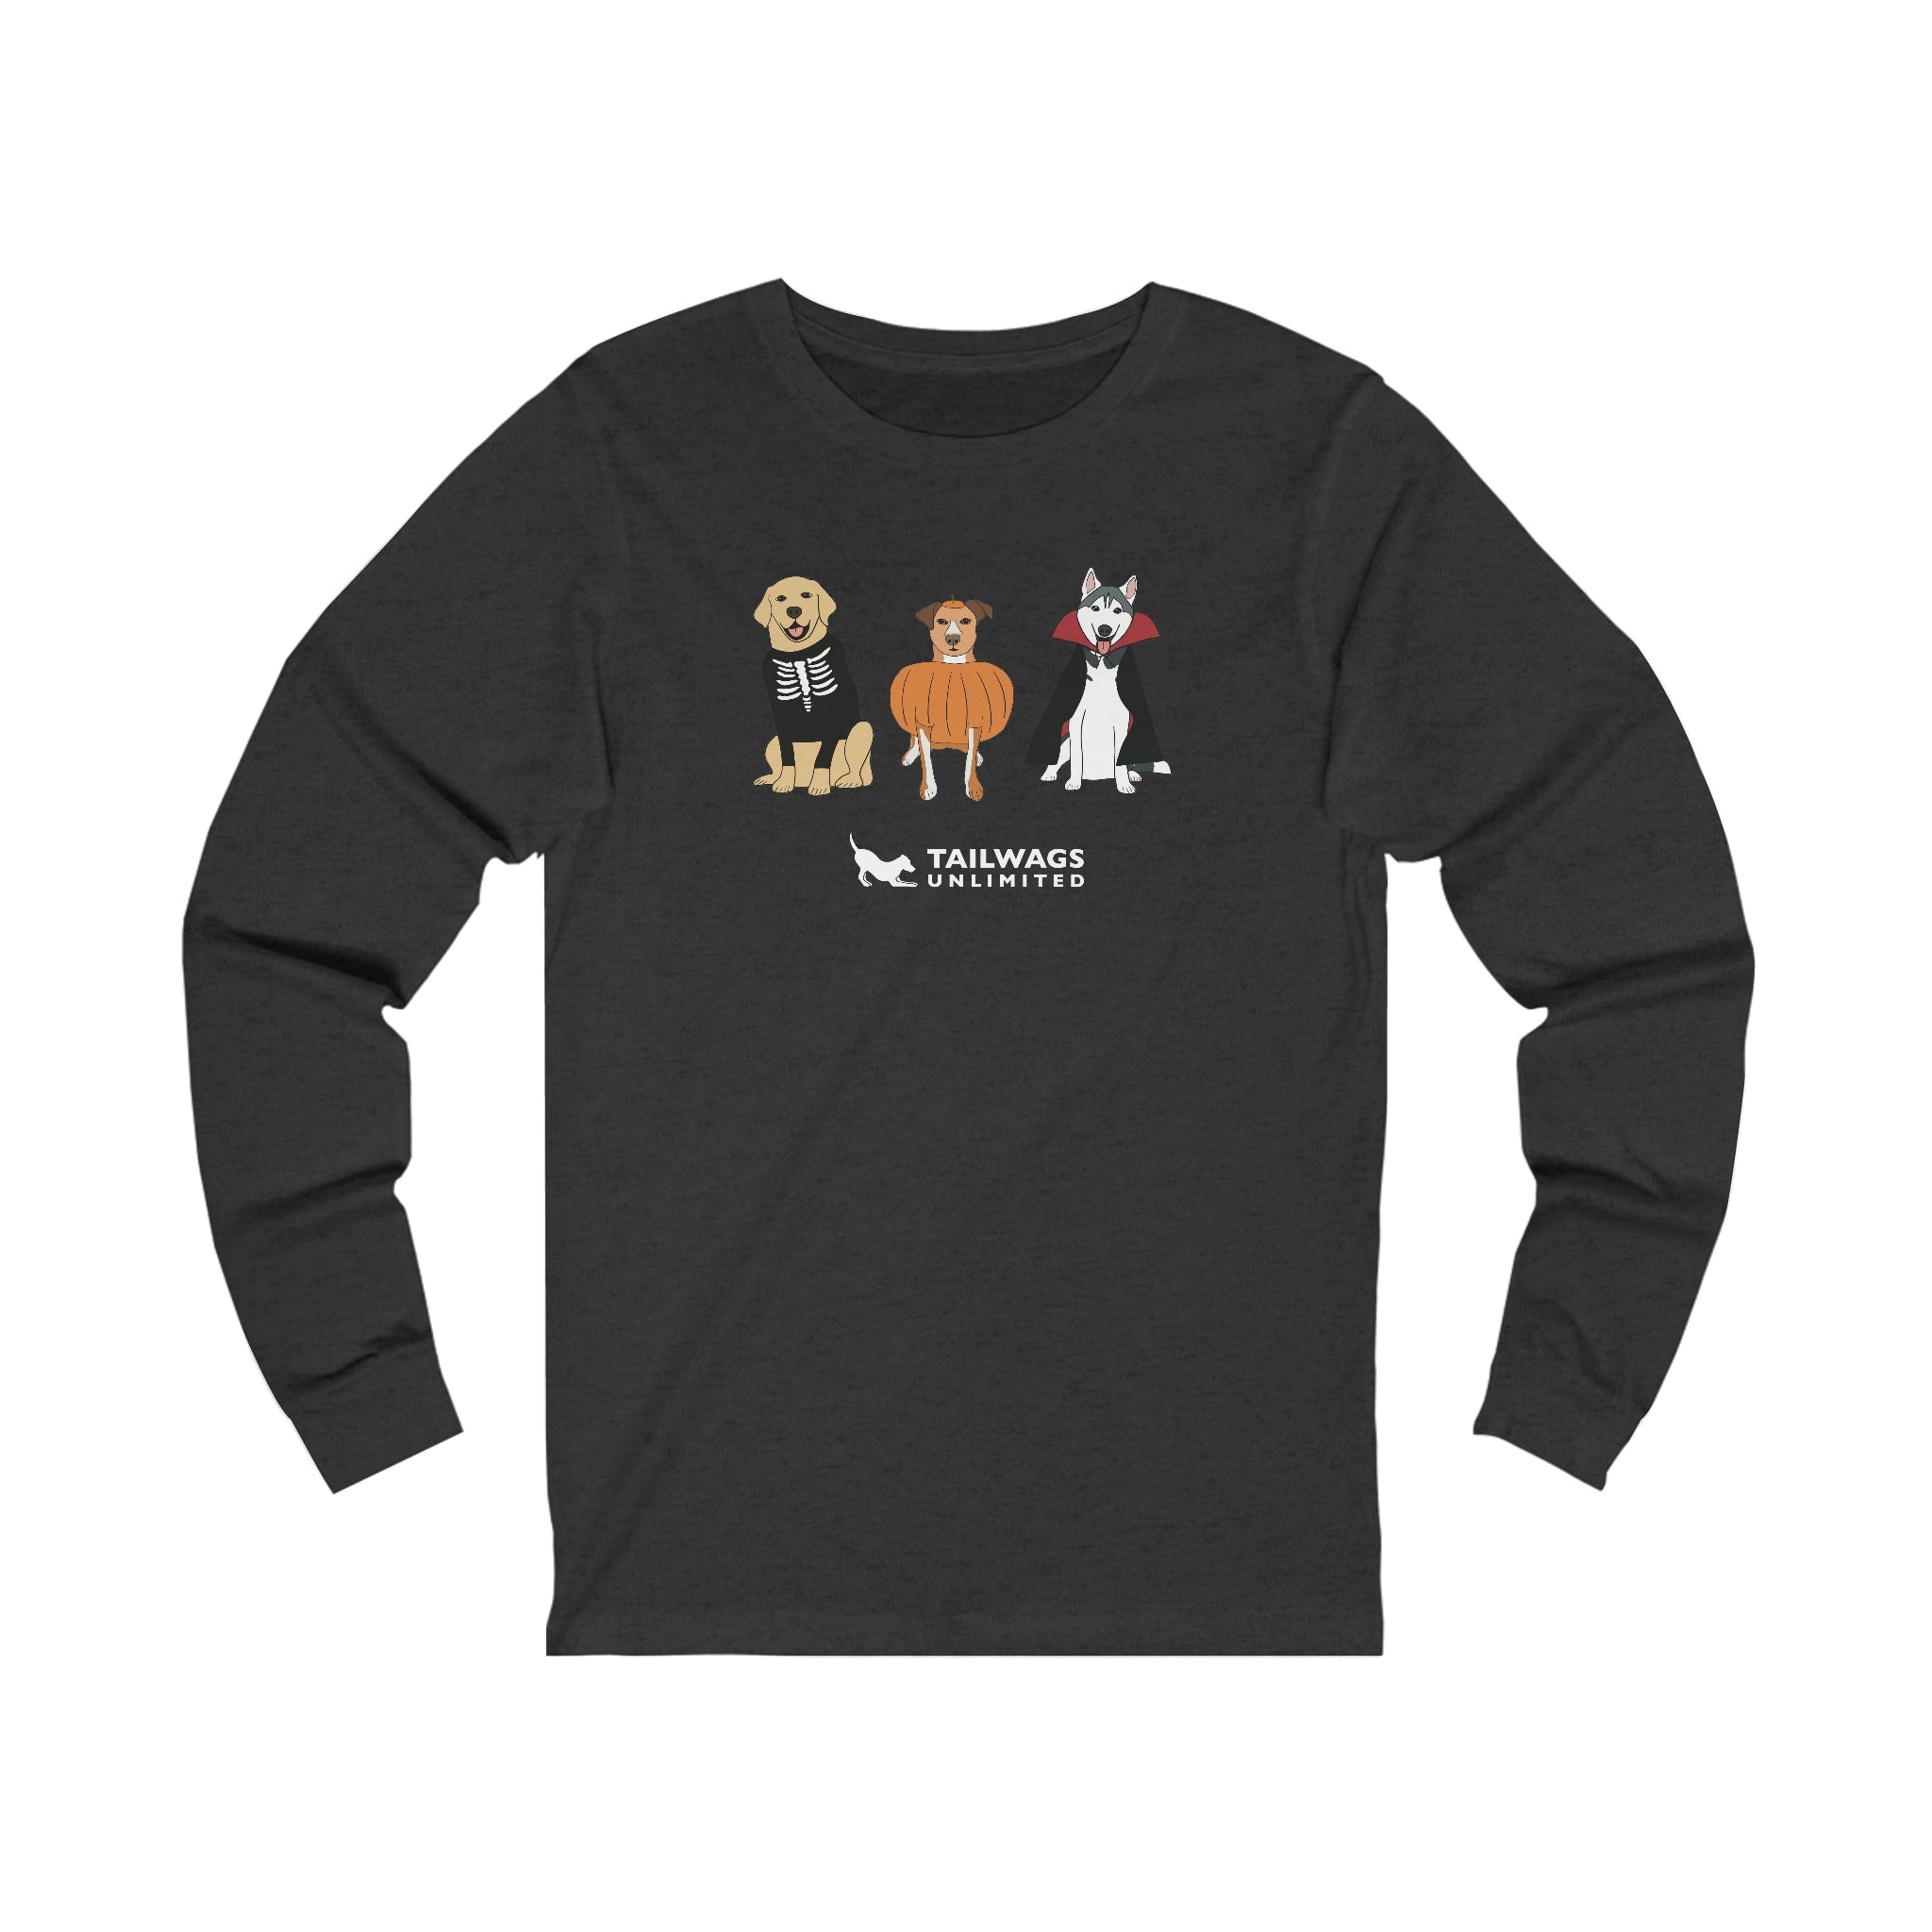 Dogs in Costume Long Sleeve Tee - TAILWAGS UNLIMITED